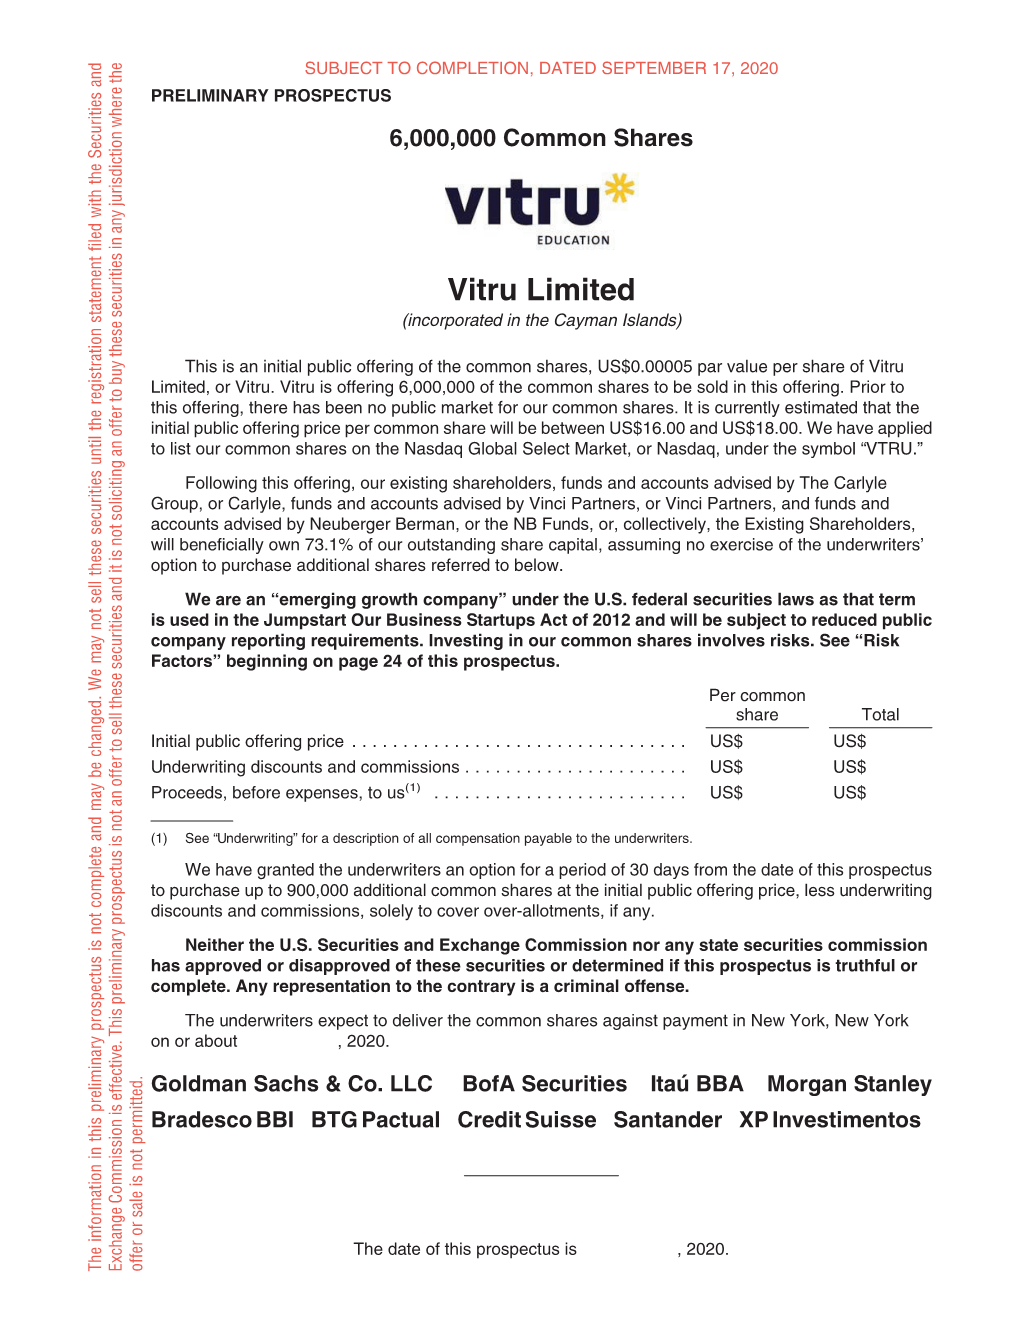 Vitru Limited (Incorporated in the Cayman Islands)